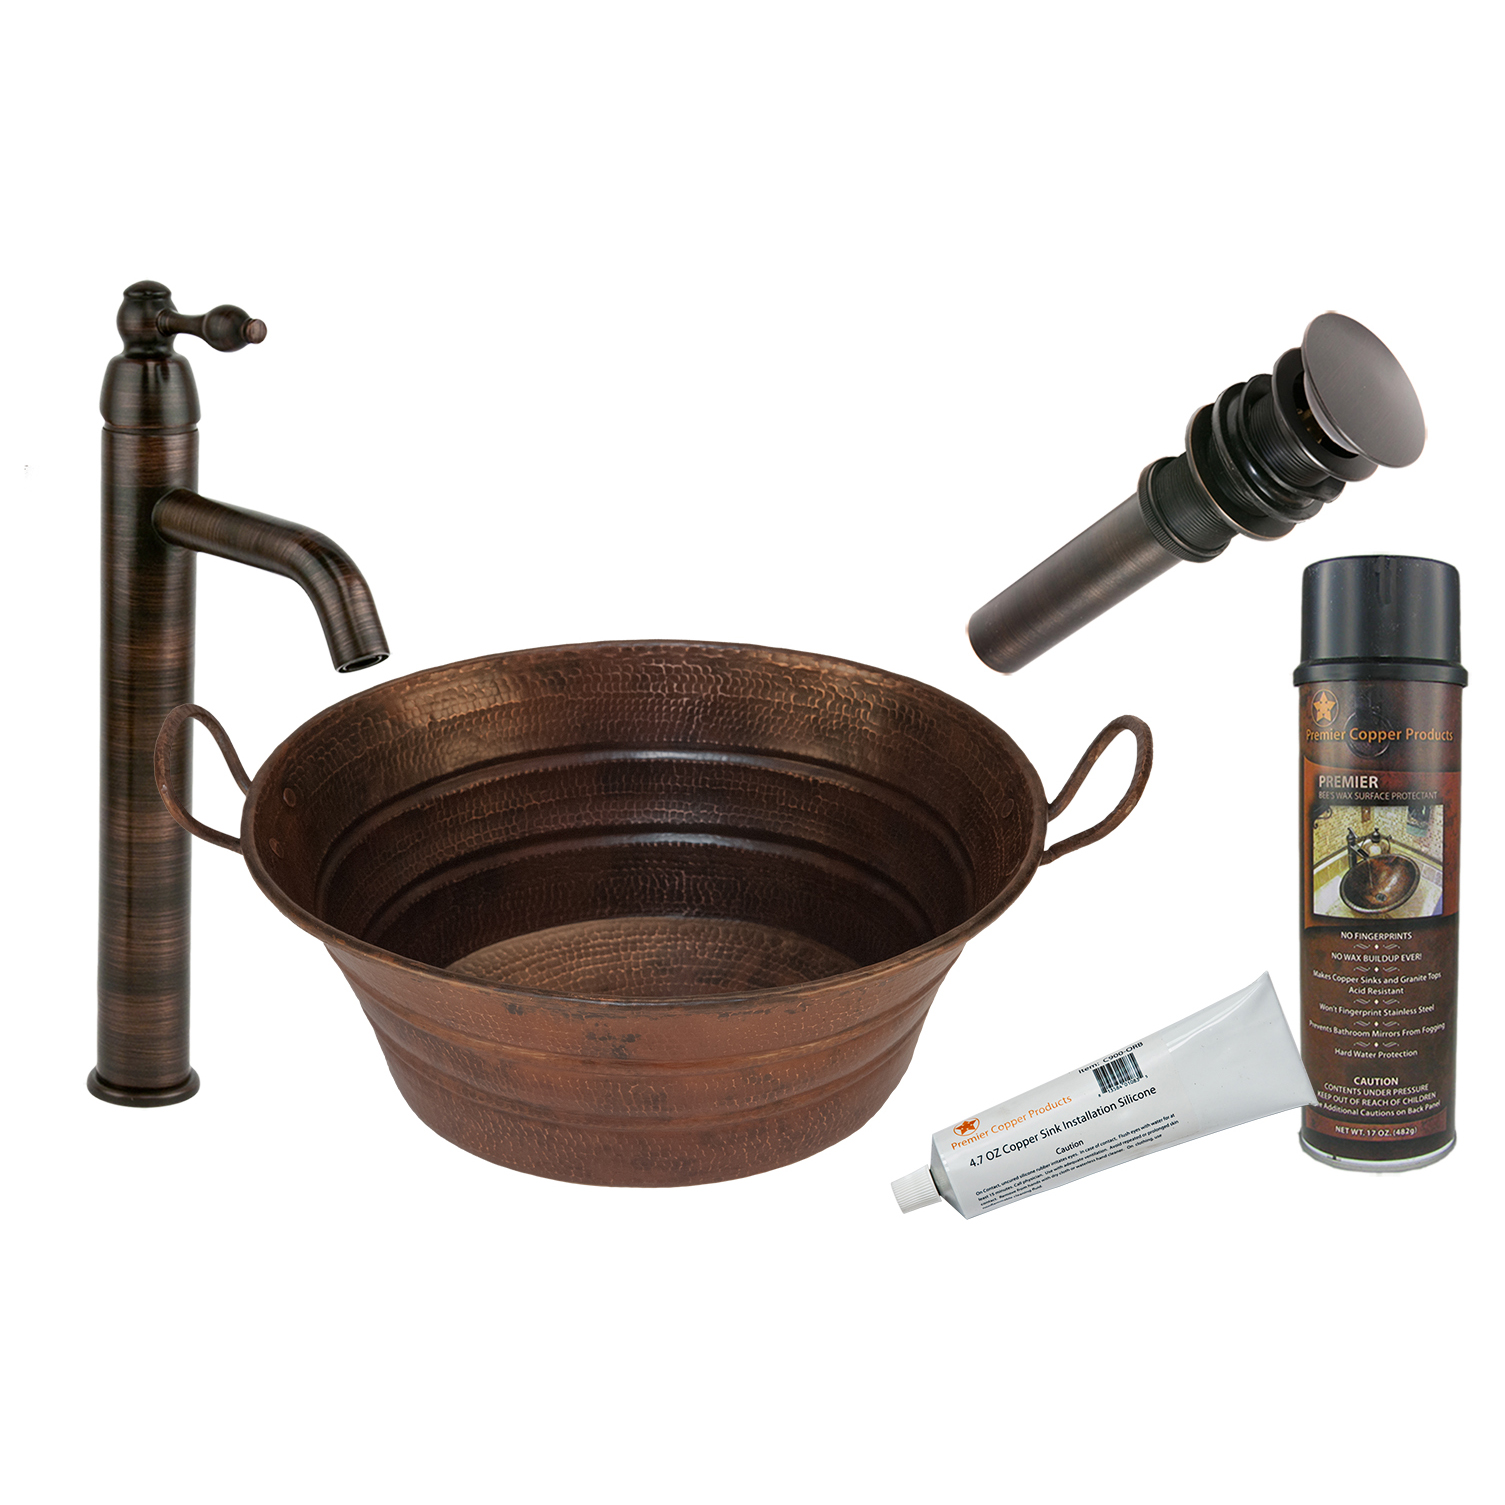 Oval Bucket Vessel Hammered Copper Sink With Handles, Faucet And Accessories Package, Oil Rubbed Bronze